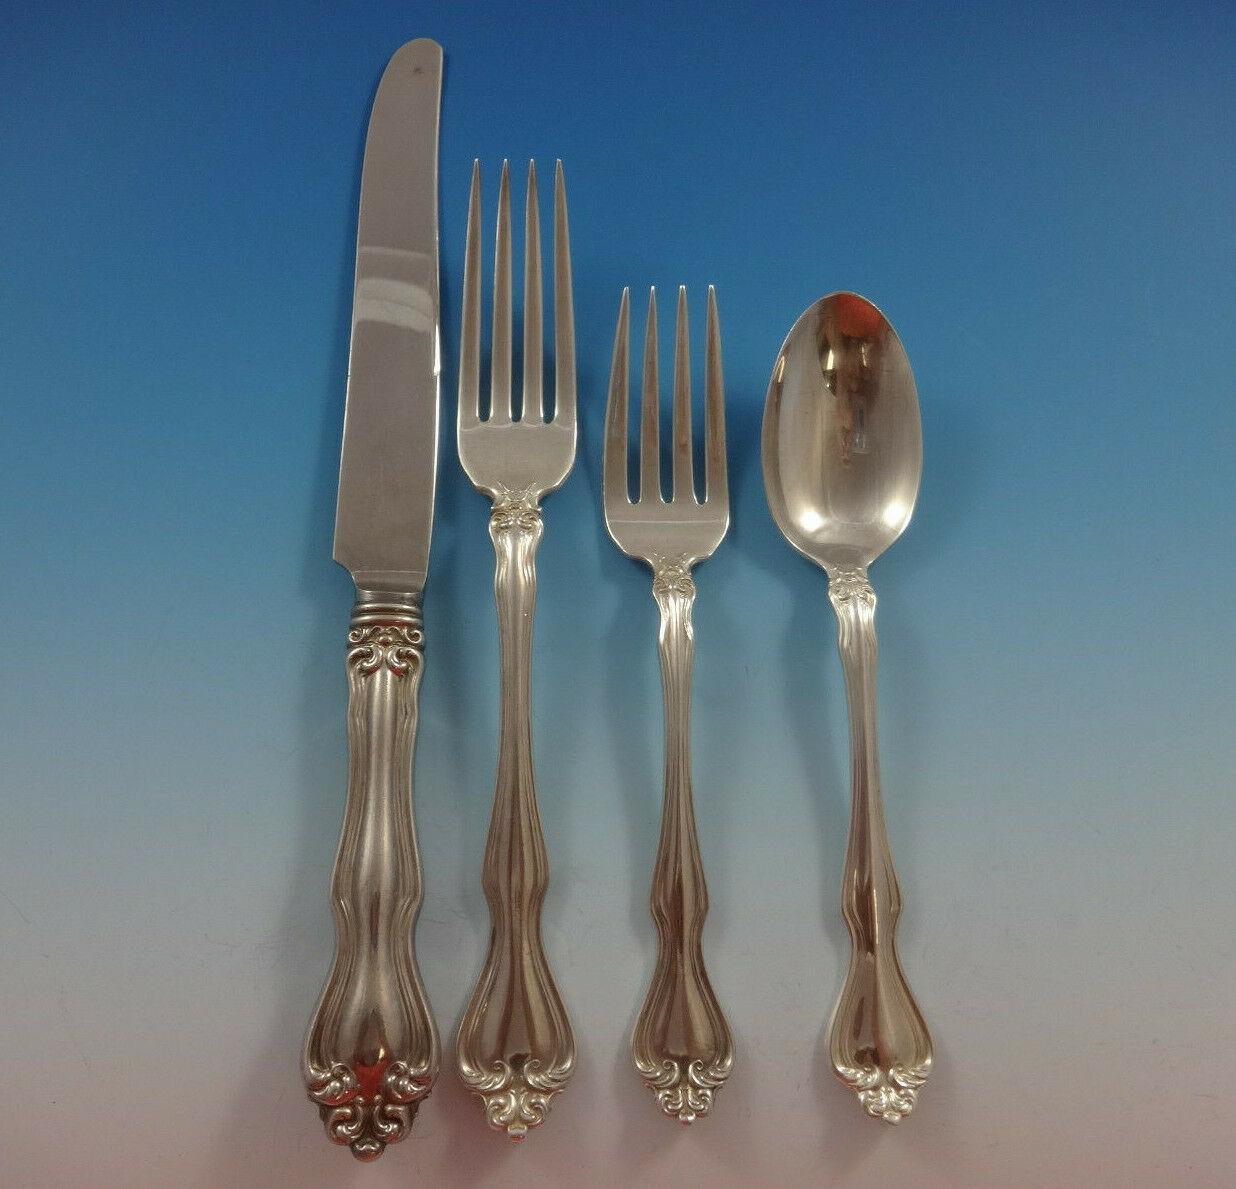 George & Martha by Westmorland Sterling Silver flatware set, 35 pieces. This set includes:

8 knives, 8 3/4